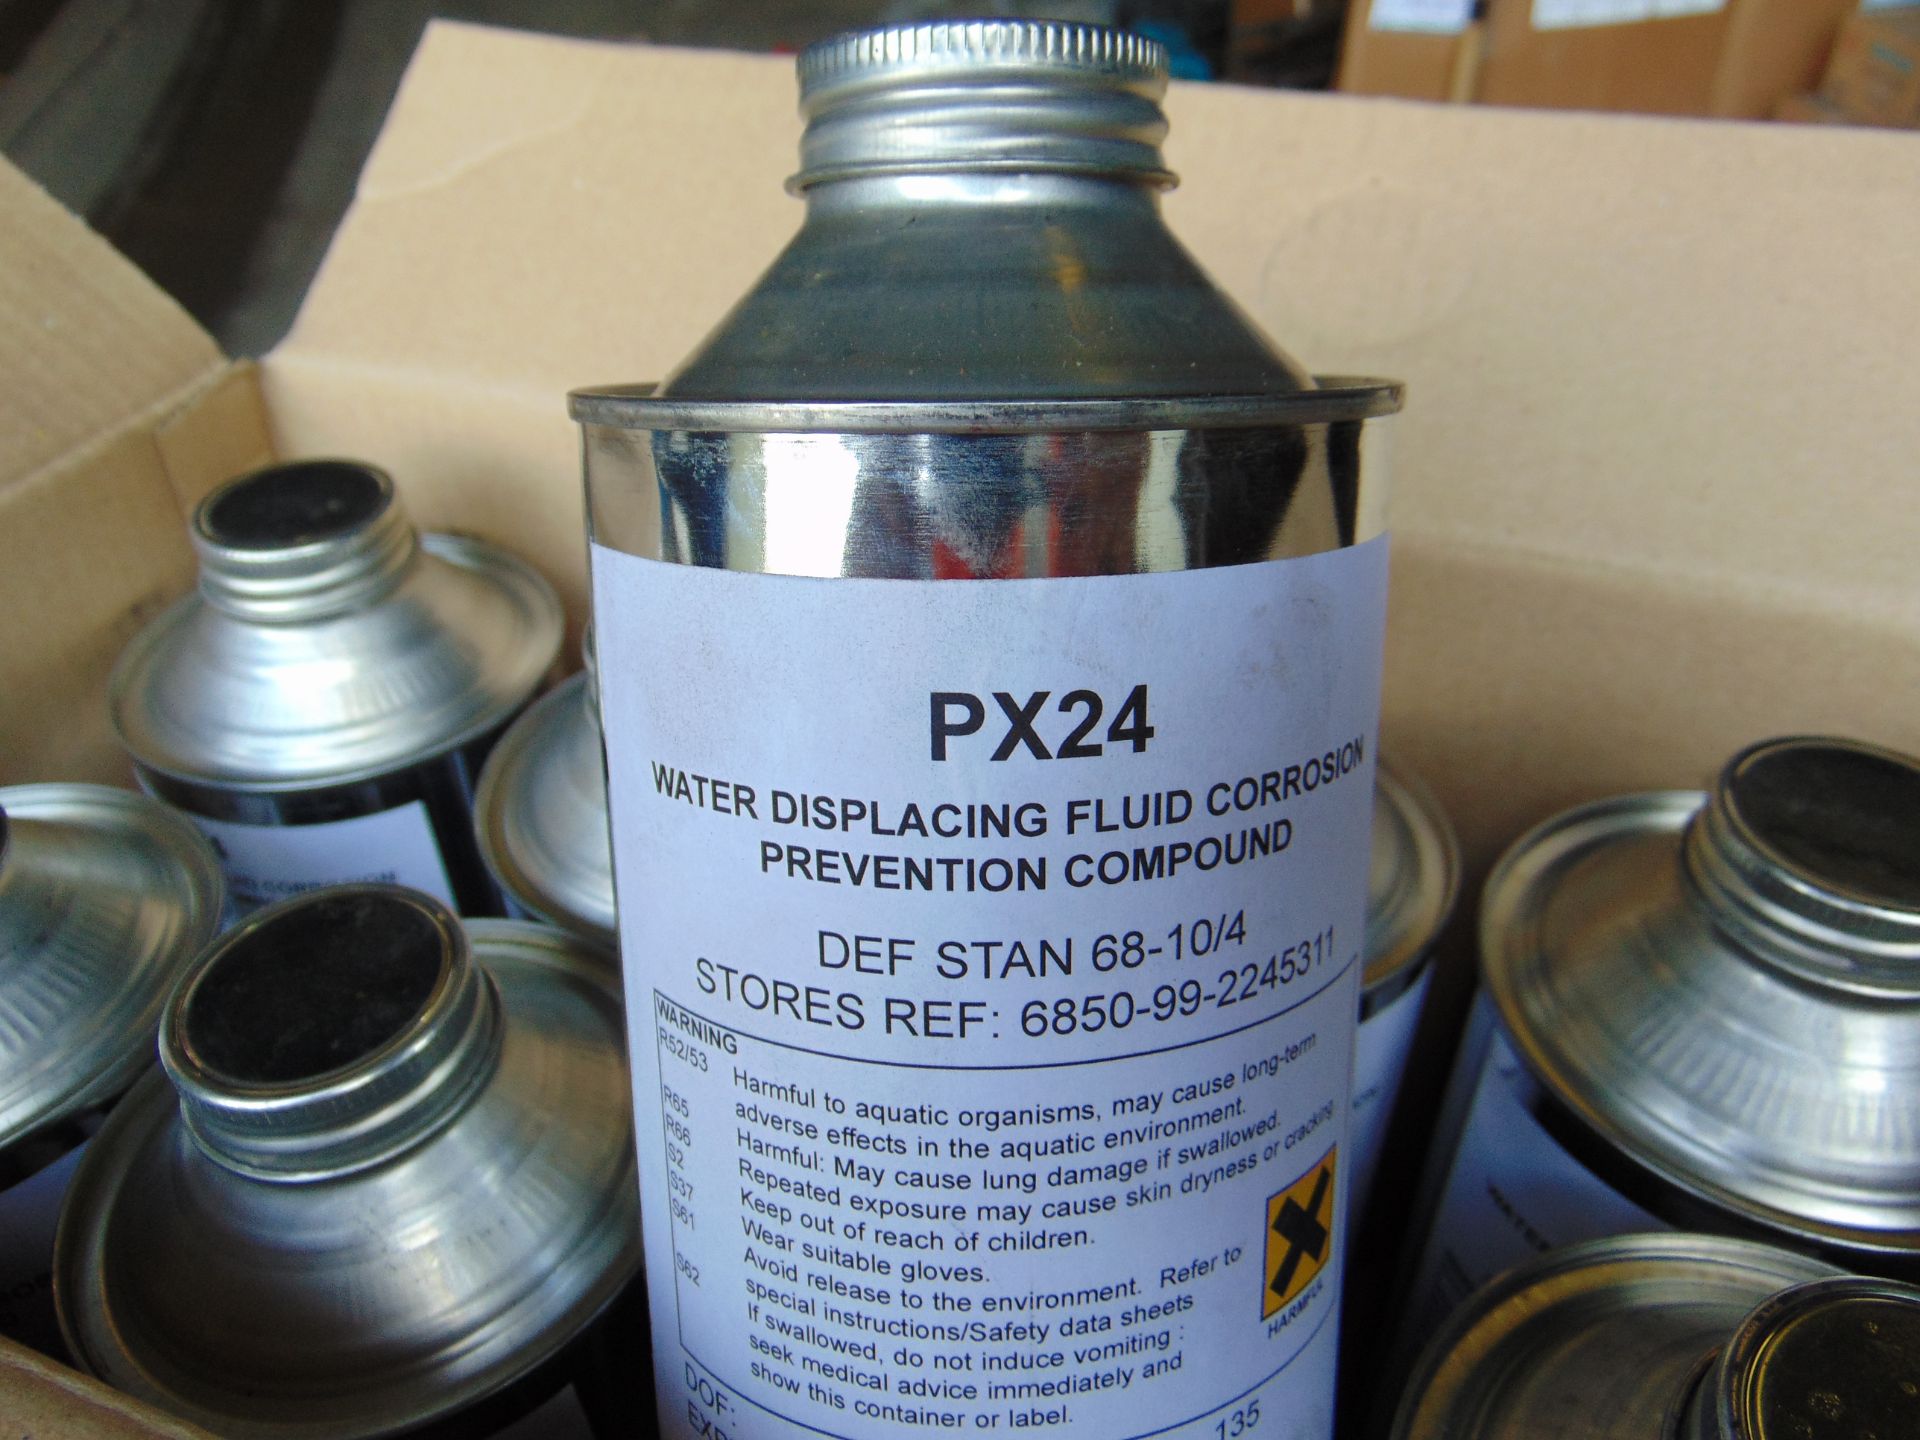 8 x 1 Ltr Bottles of PX24 Water Displacing Fluid Corrosion Prevention Compound - Image 4 of 6